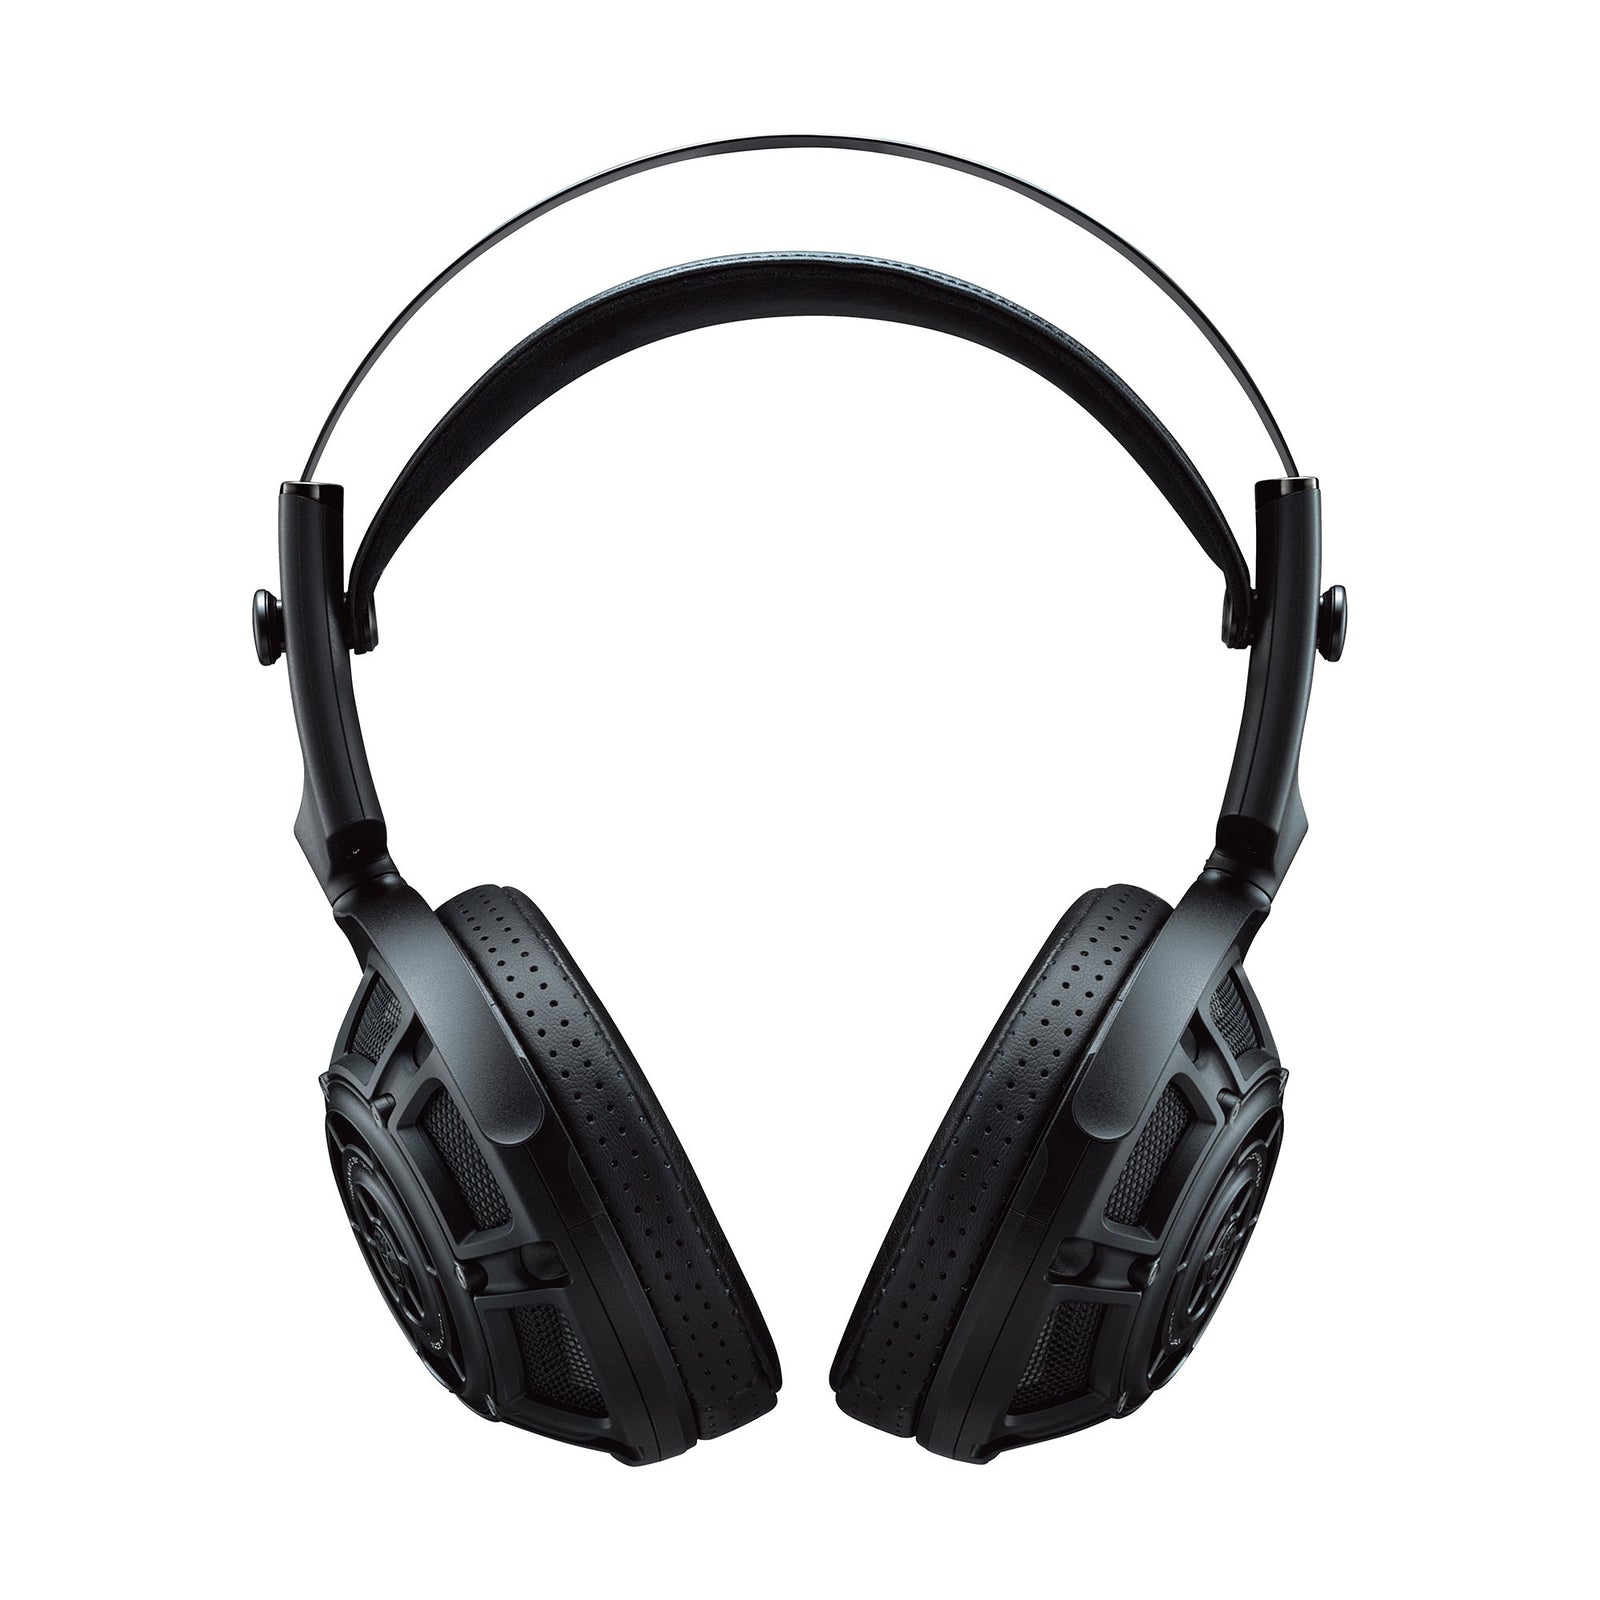 Yamaha YH5000SE - Headphones Flagship Headphone that offers ultimate True Sound using an ORTHODYNAMIC™ driver. Yamaha True Sound allows you to immerse yourself in a world of sound and music Yamaha ORTHODYNAMIC™ driver provides sonic accuracy and enables ultra-responsive performance Ultra-lightweight